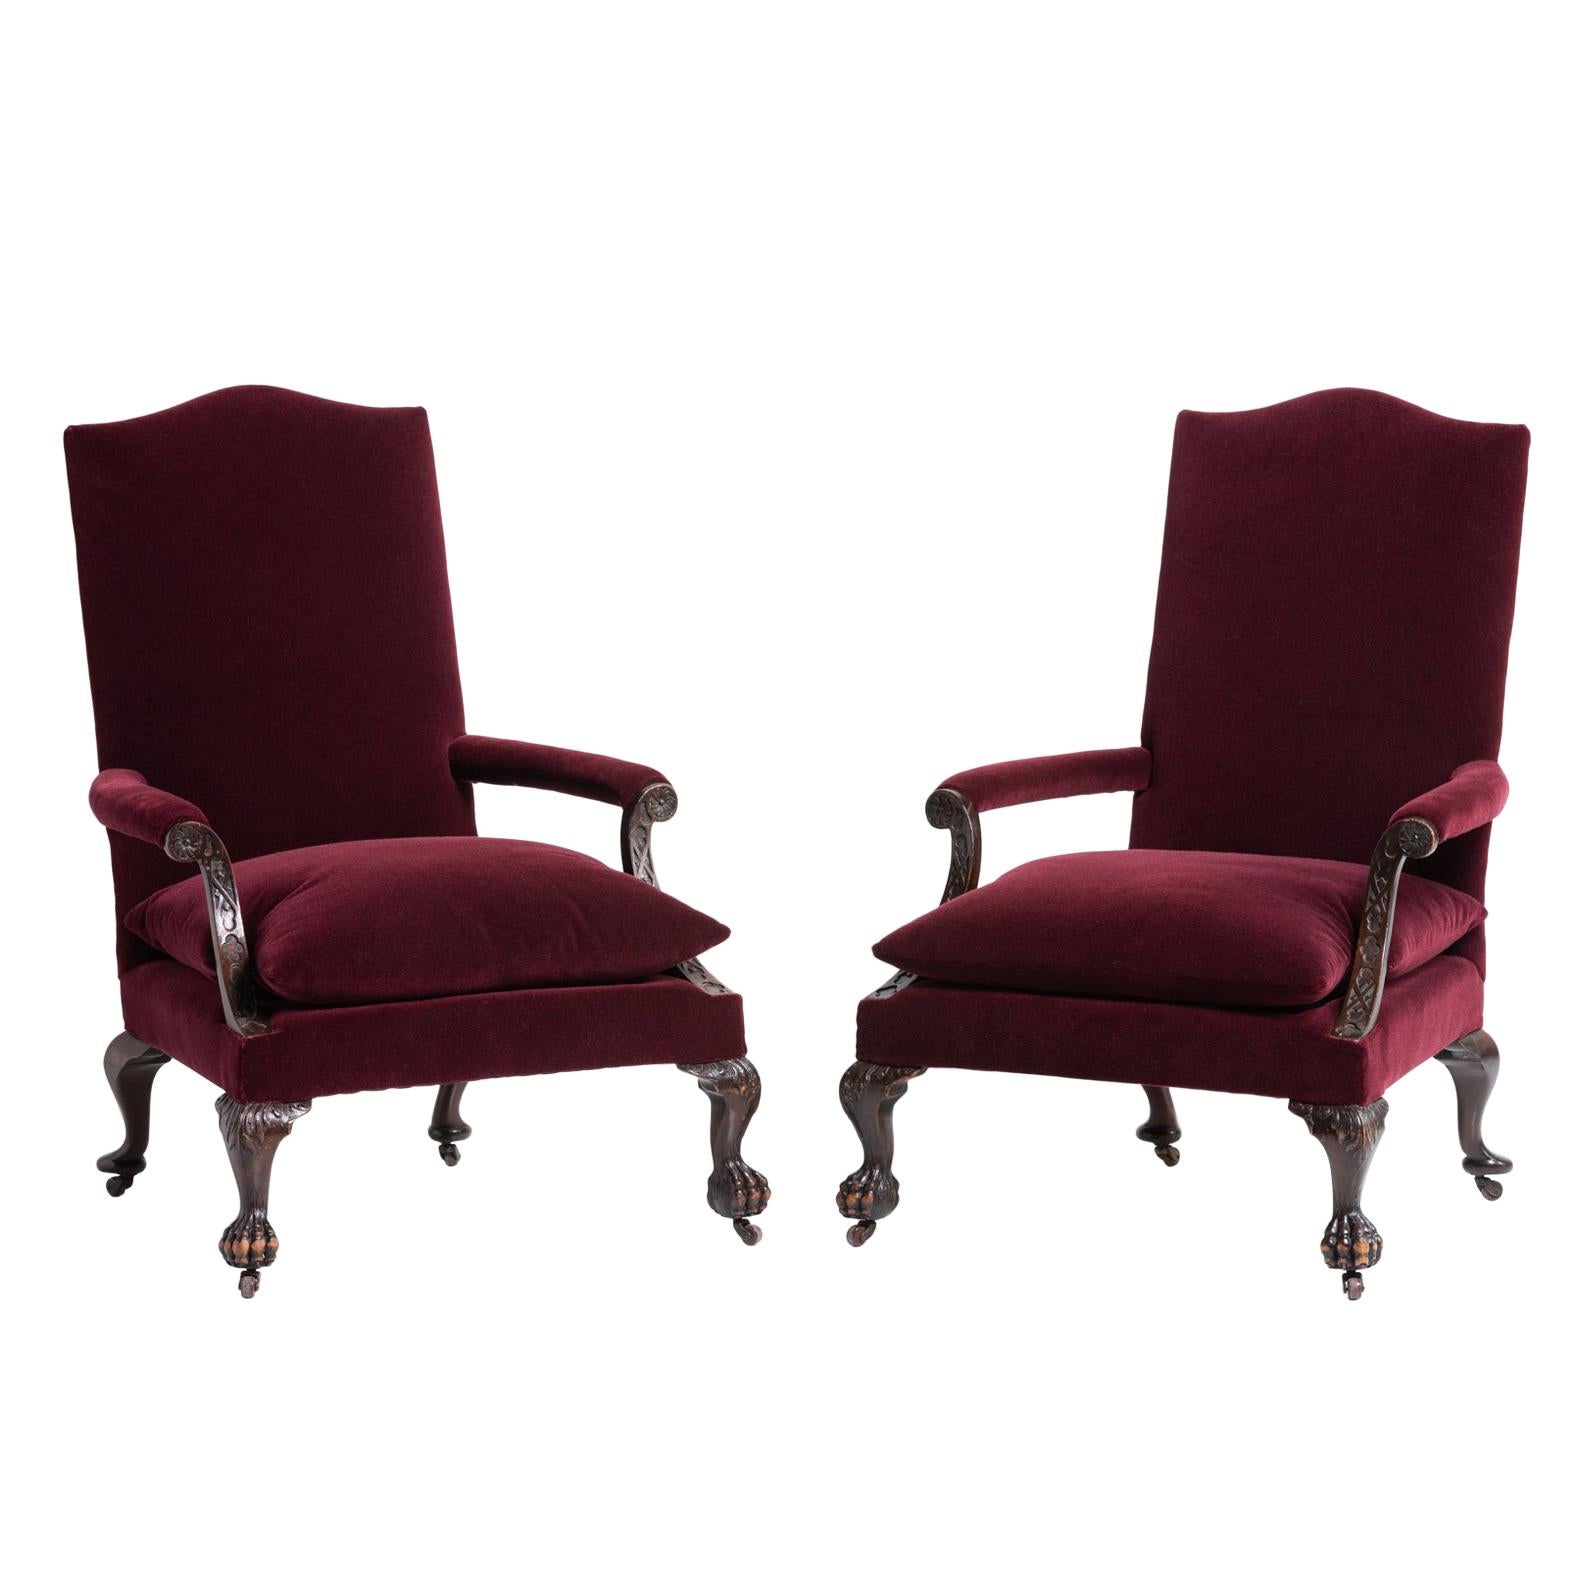 Pair of Ball and Claw Armchairs, England, circa 1890